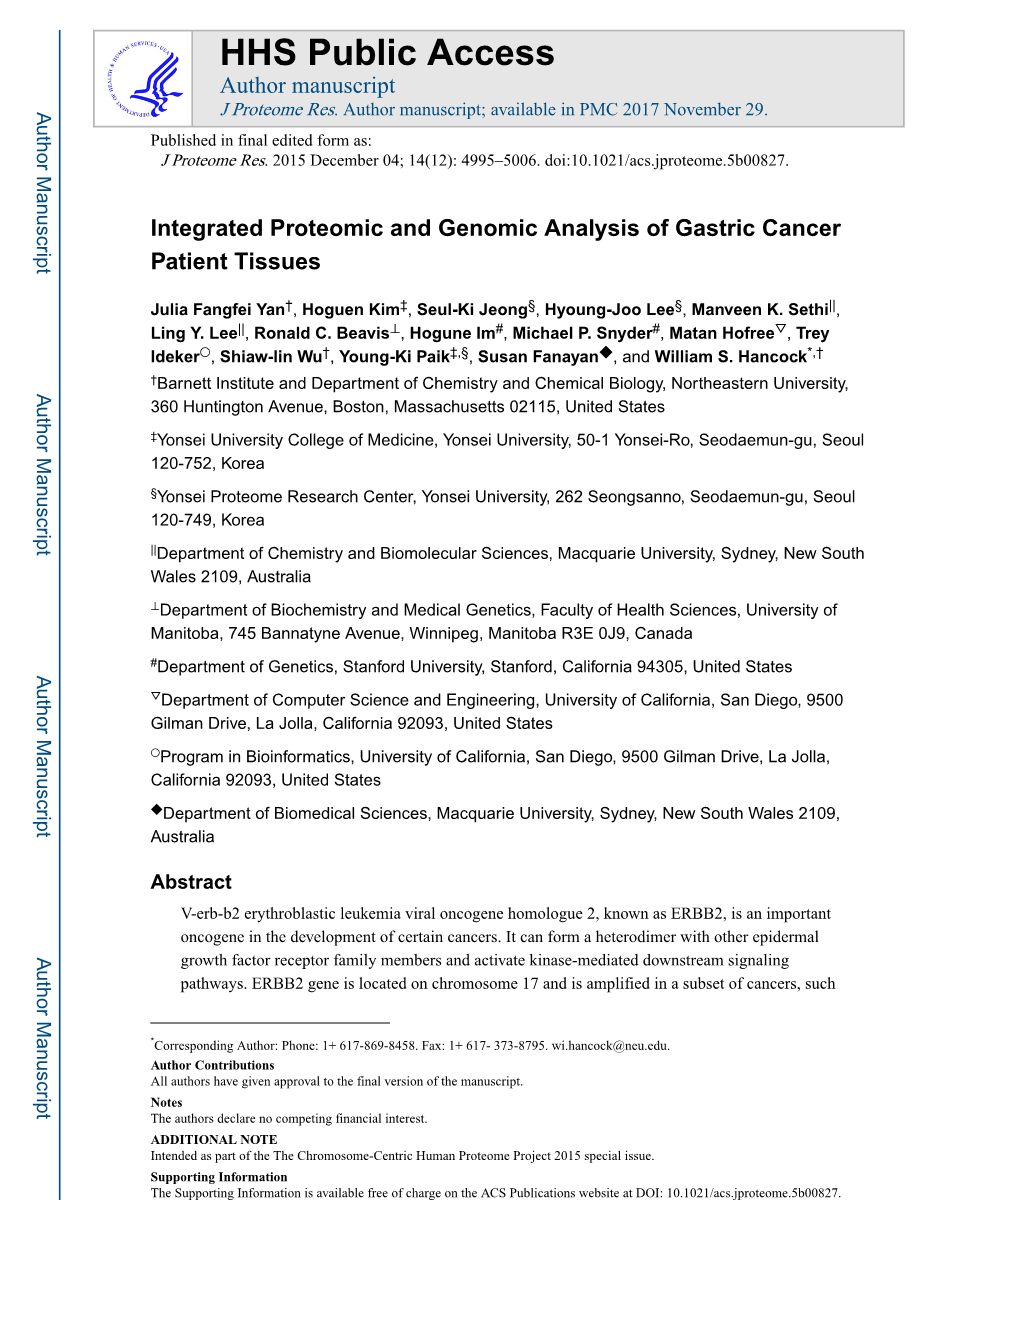 Integrated Proteomic and Genomic Analysis of Gastric Cancer Patient Tissues